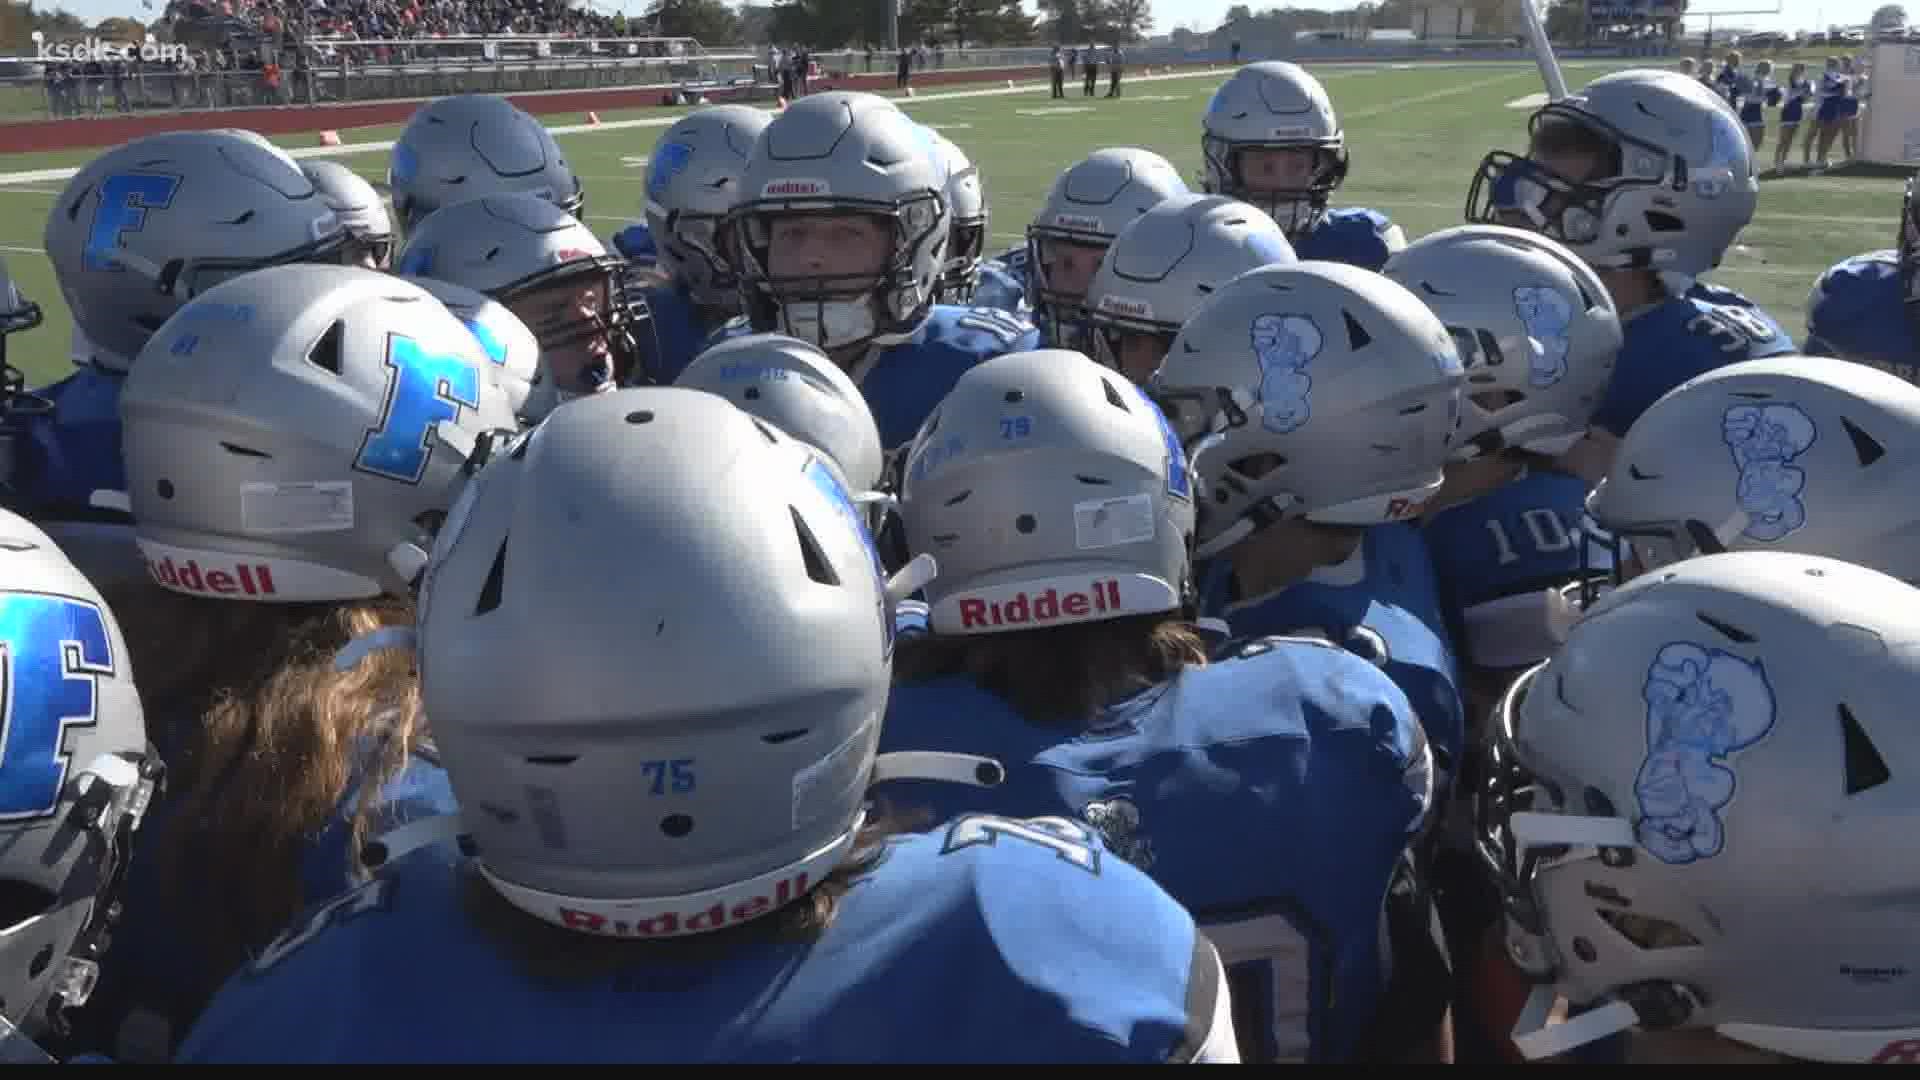 It's been 26 years since the Midgets made it this far into a football season. They're looking to keep the ride going.